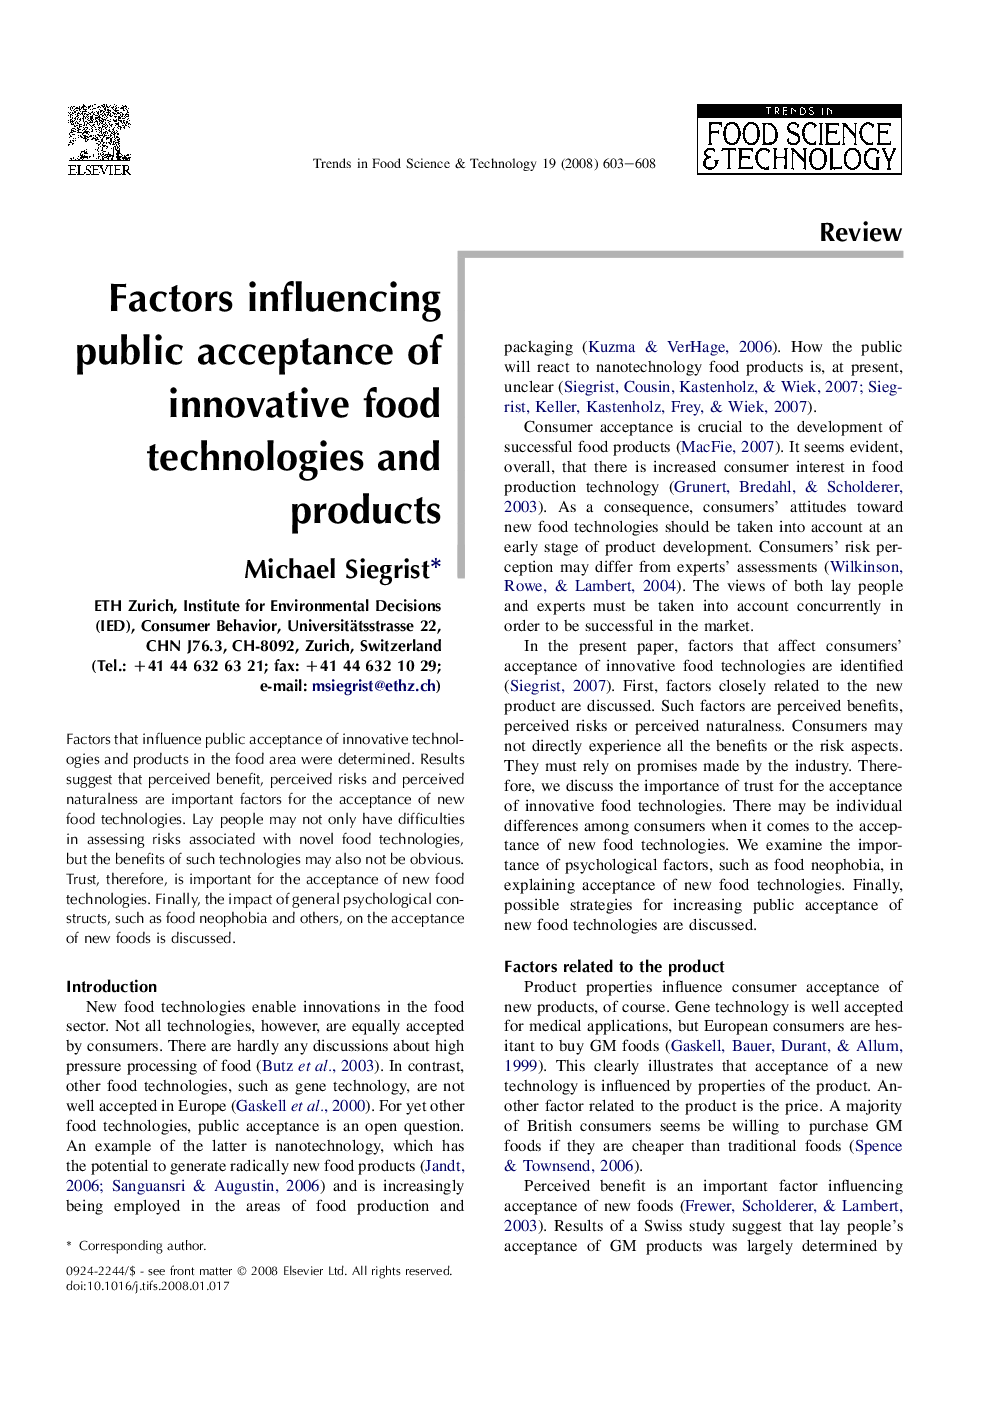 Factors influencing public acceptance of innovative food technologies and products